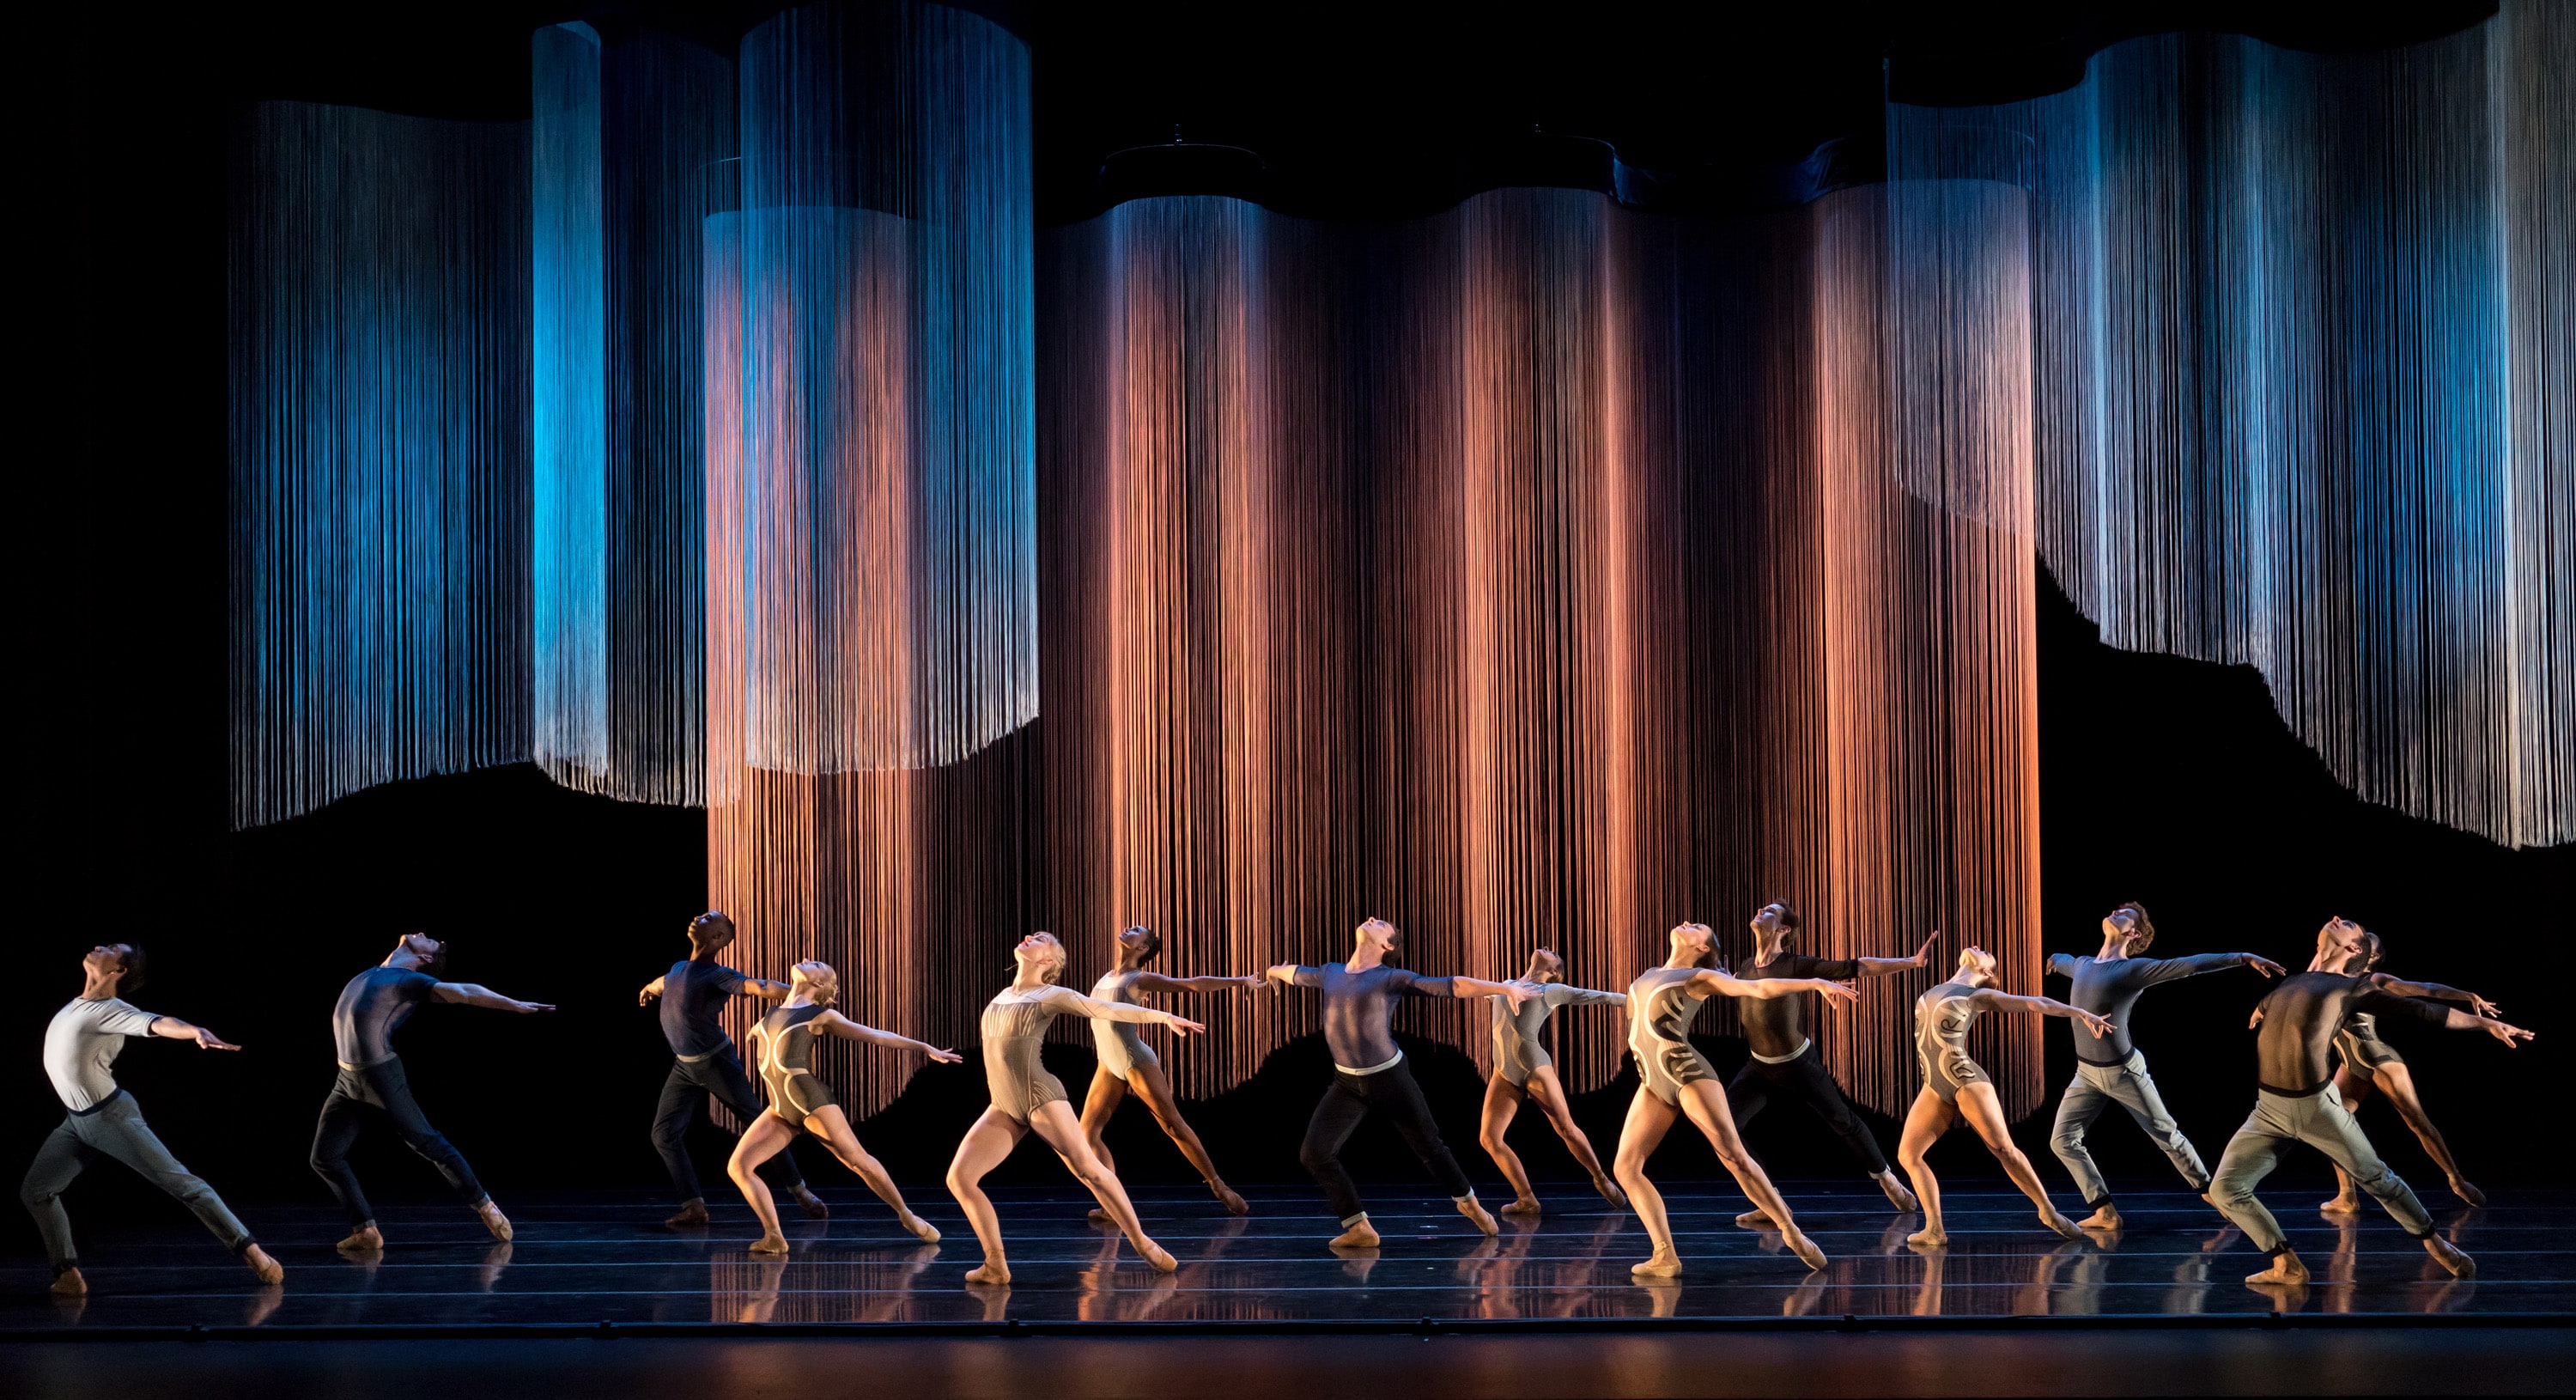 The Smuin Contemporary American Ballet company performs Helen Pickett's Oasis, given its world premiere as part of Smuin's Dance Series Two during its 2015/2016 season. Photo credit: Keith Sutter